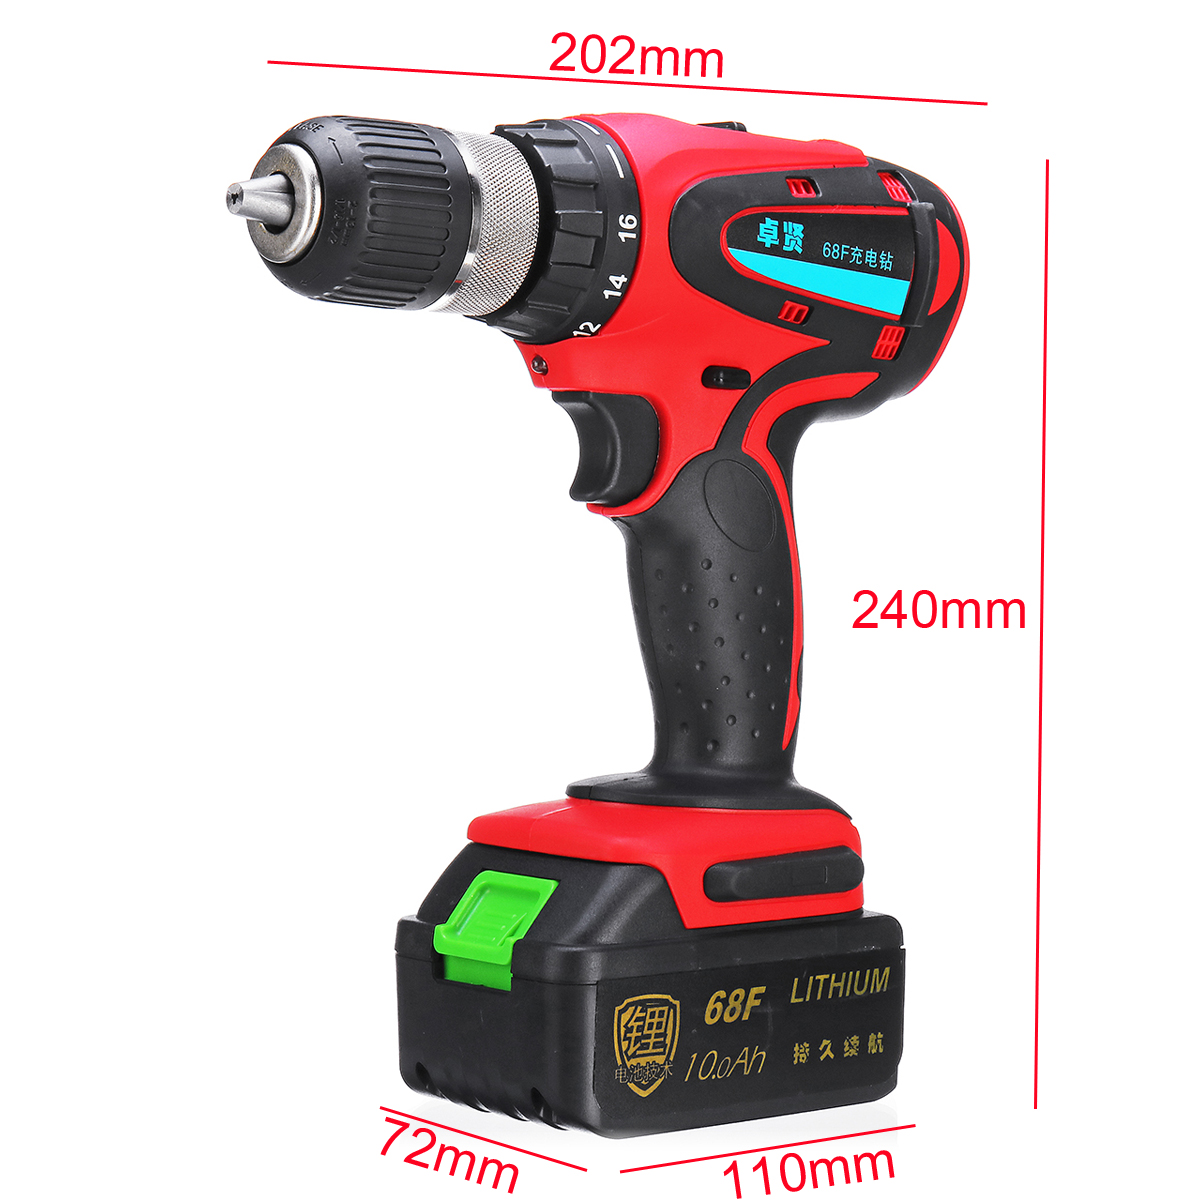 68V-10Ah-Cordless-Rechargeable-Electric-Drill-2-Speed-Heavy-Duty-Torque-Power-Drills-1403940-10